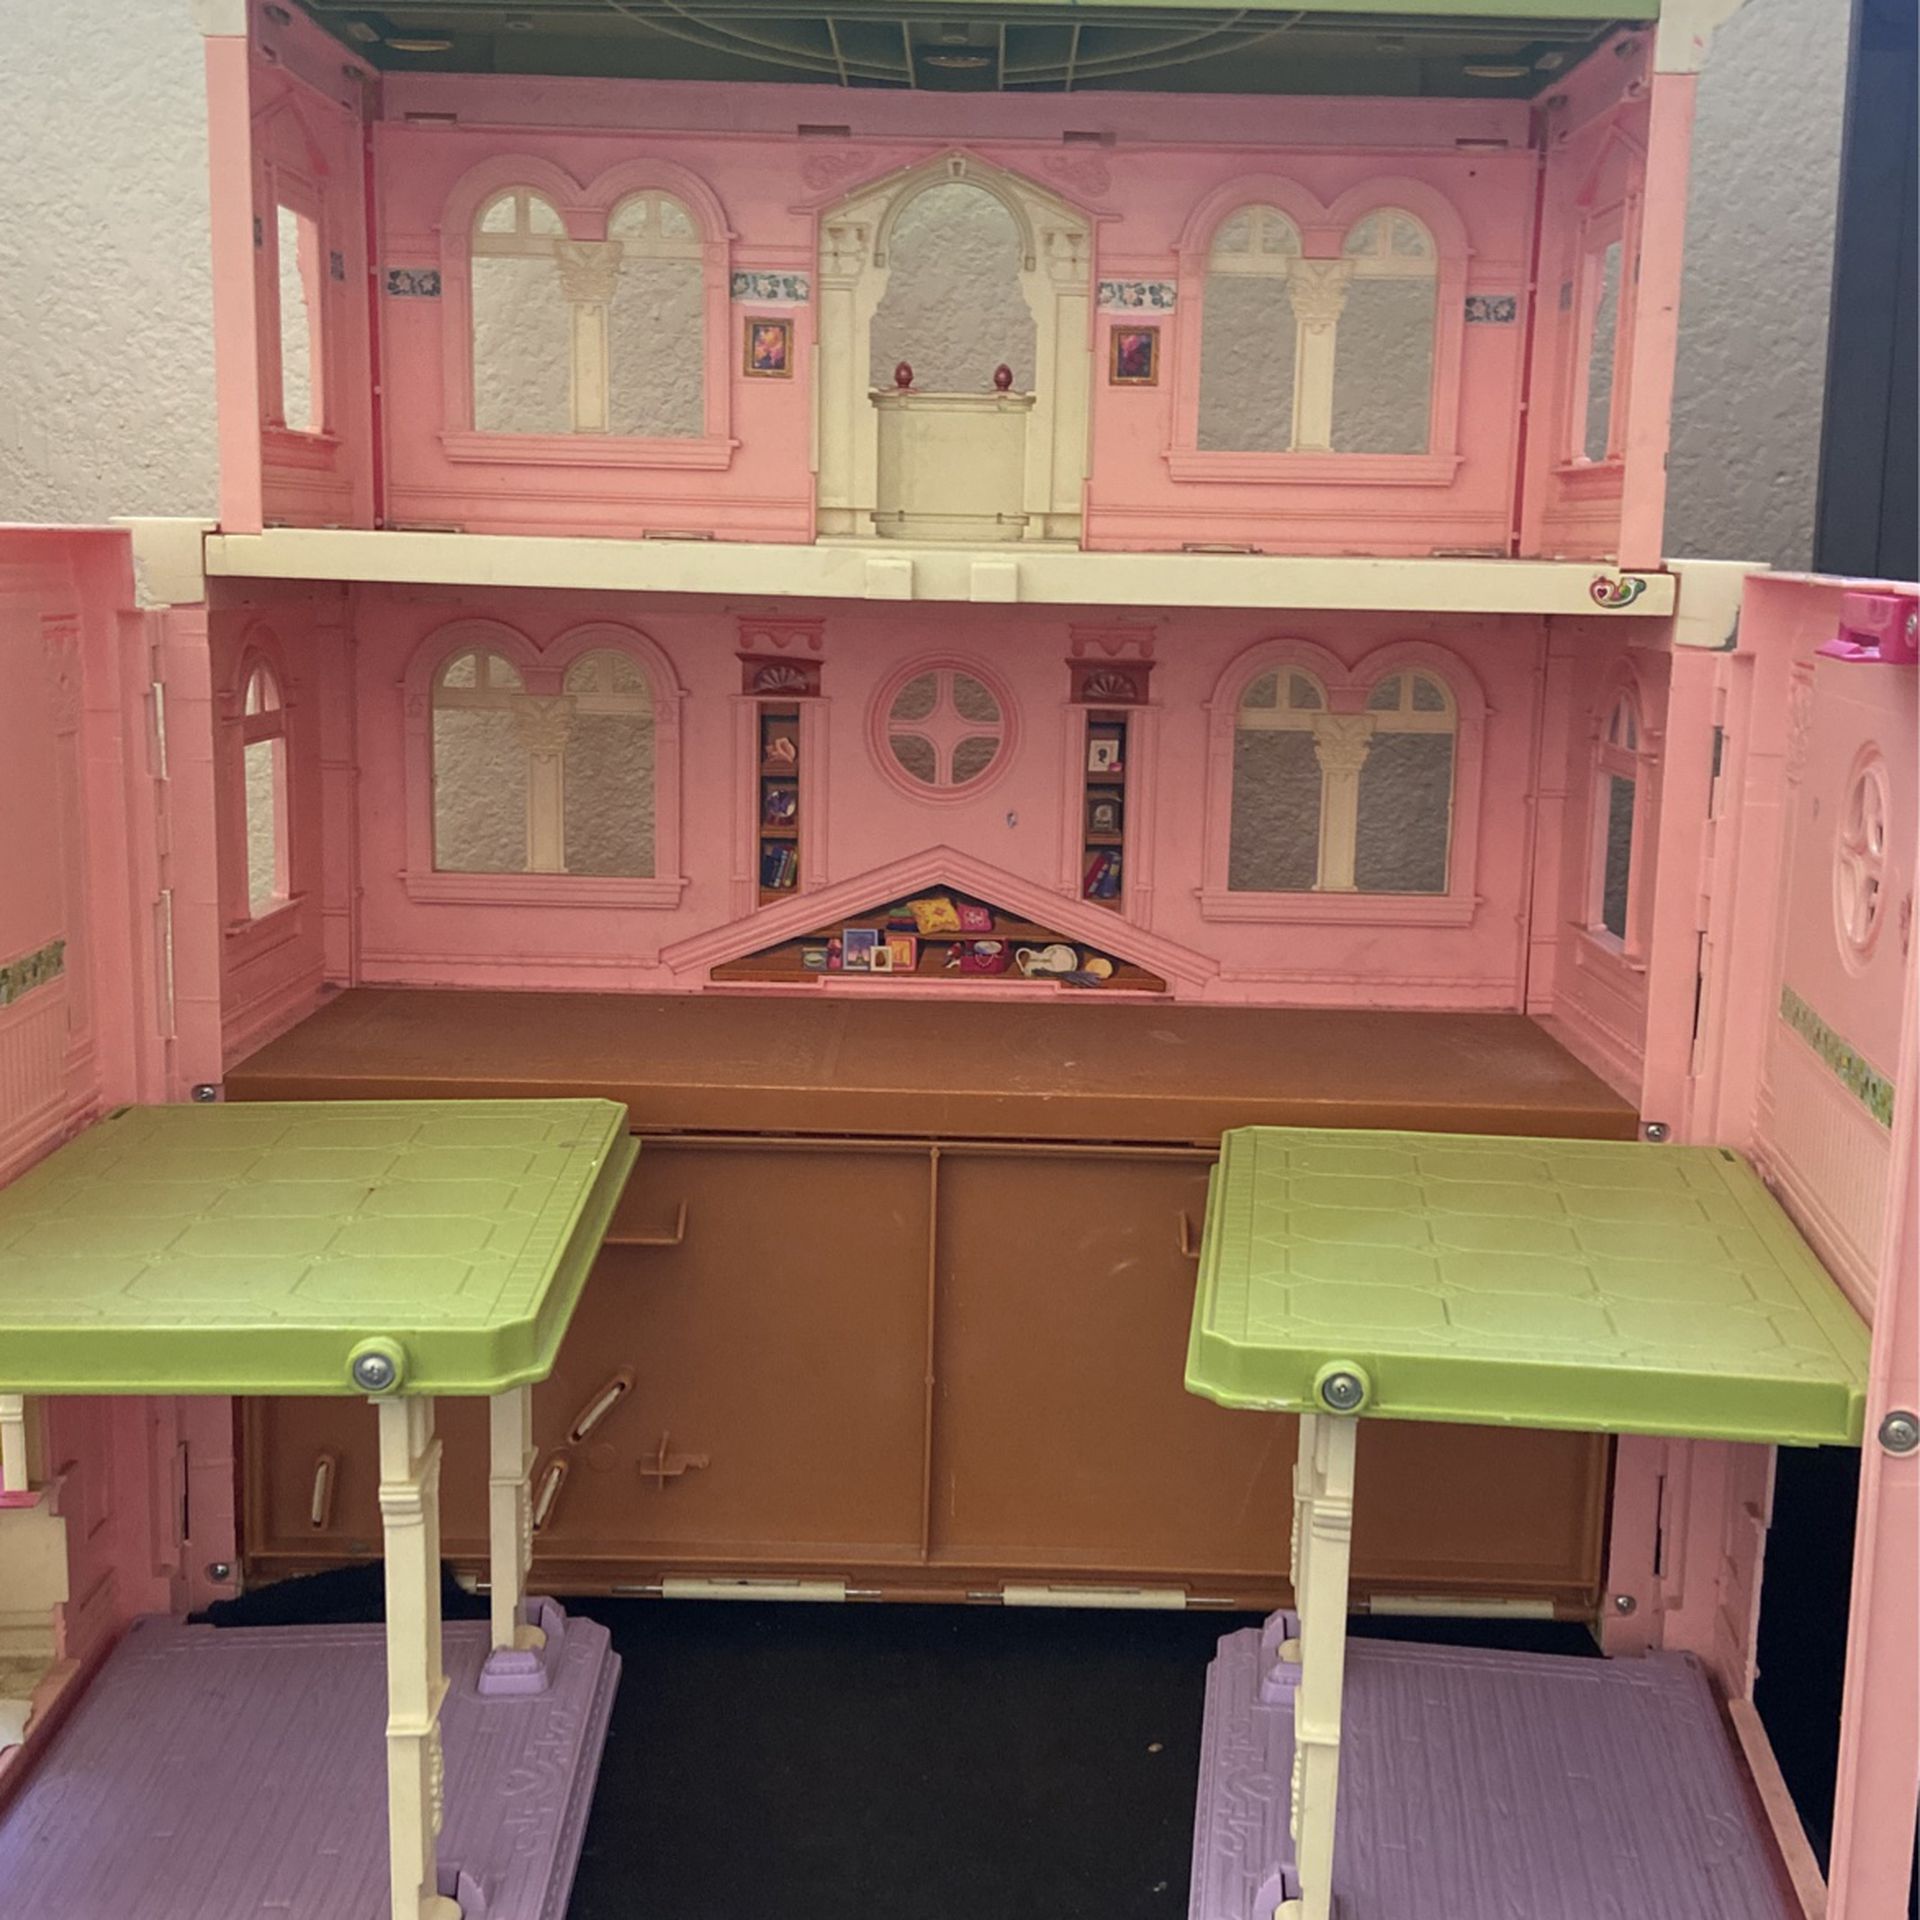 Play Doll House For sale!!! $40 for Sale in Sacramento, CA - OfferUp